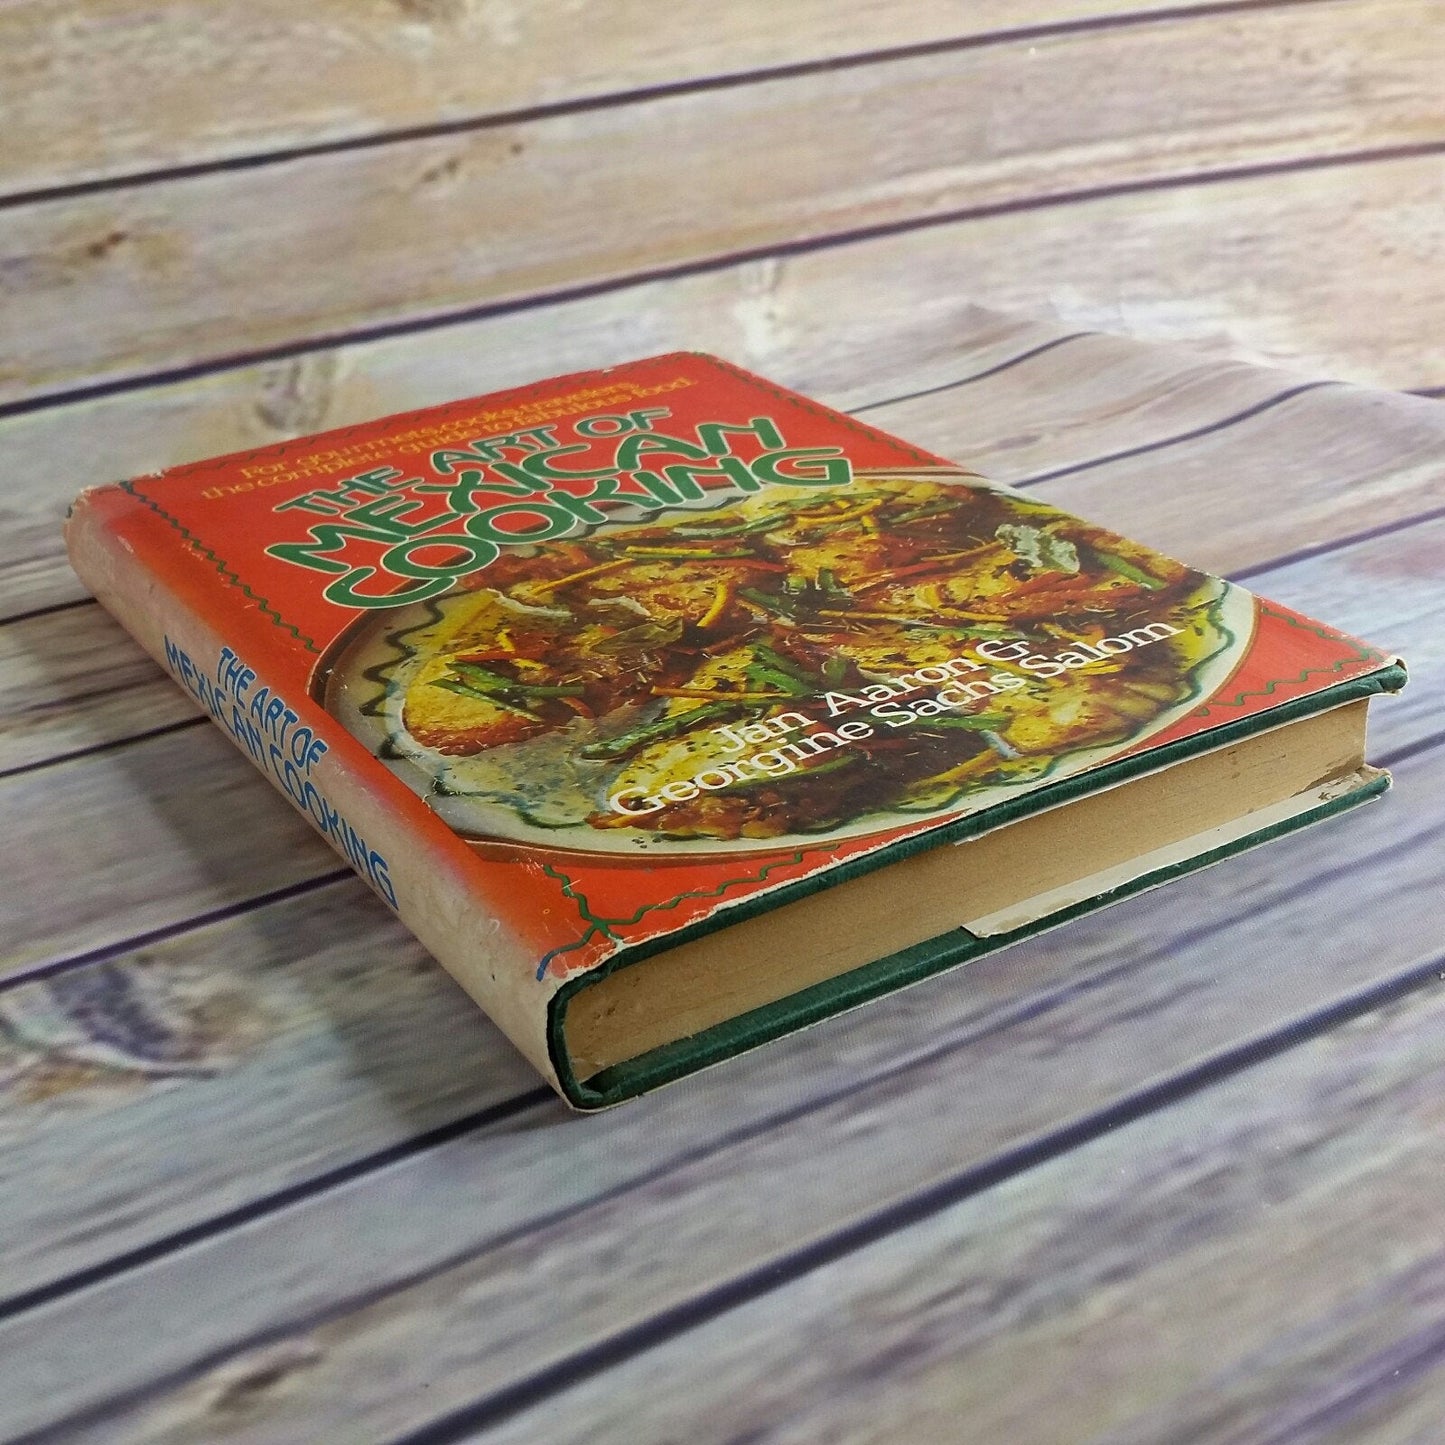 Vintage Mexican Cookbook The Art of Mexican Cooking Recipes 1981 Jan Aaron Georgine Salom Hardcover with Dust Jacket